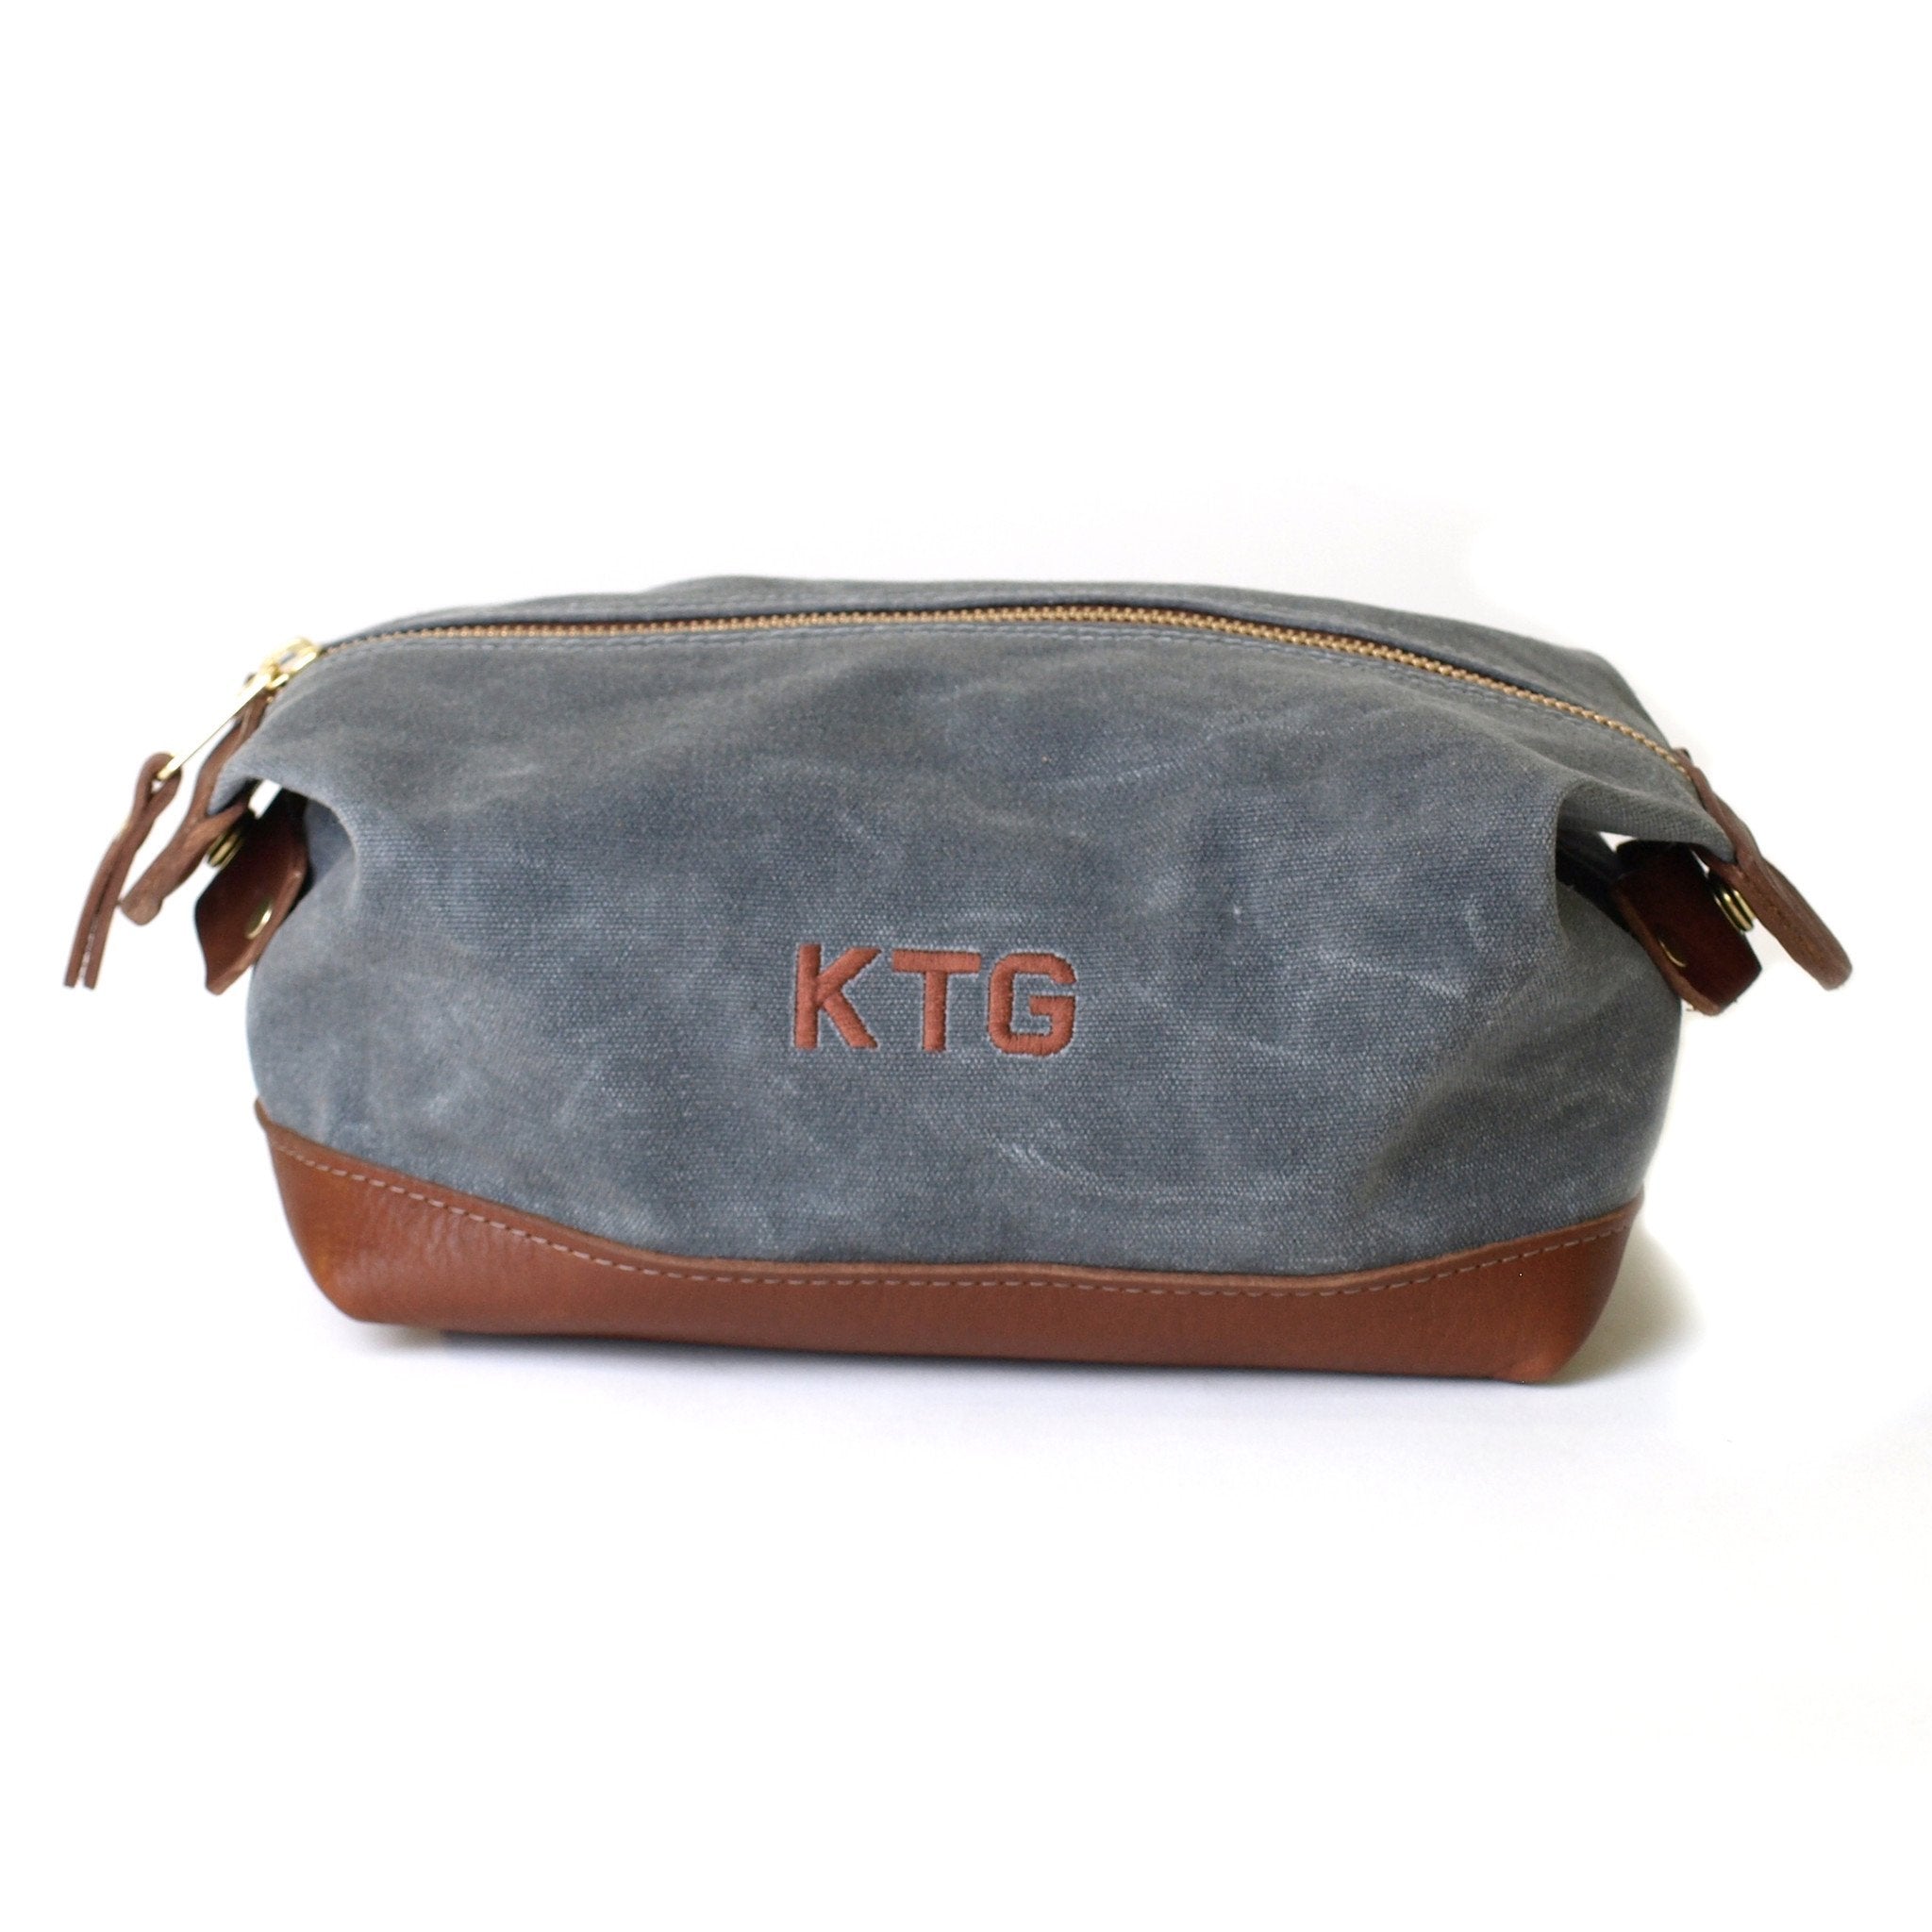 Del Mar Dopp Kit - HPG - Promotional Products Supplier